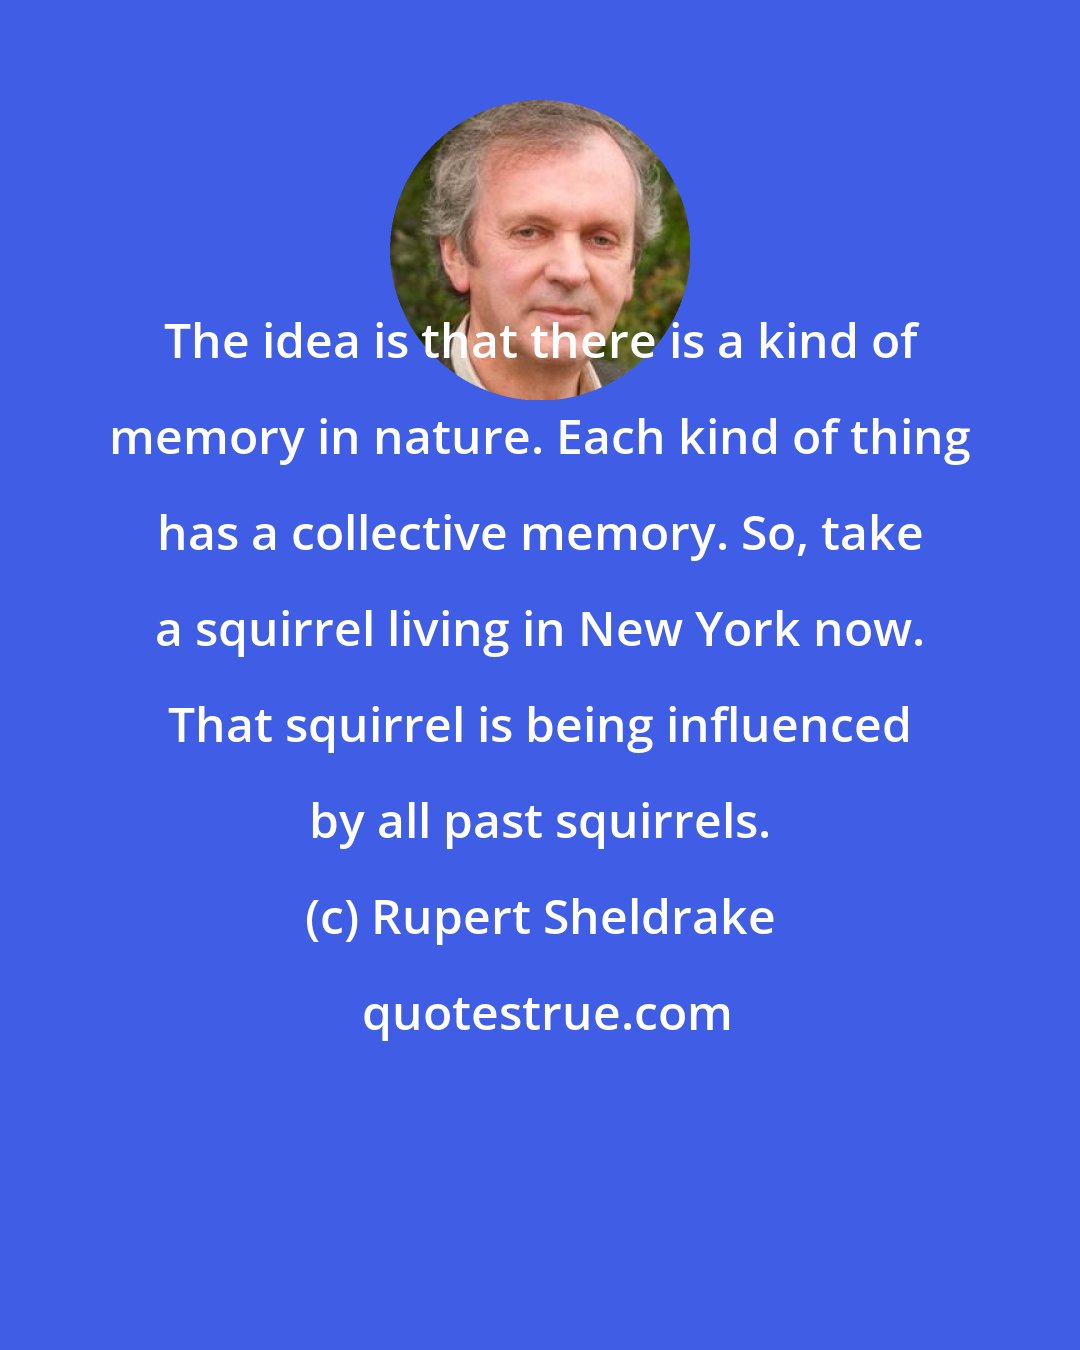 Rupert Sheldrake: The idea is that there is a kind of memory in nature. Each kind of thing has a collective memory. So, take a squirrel living in New York now. That squirrel is being influenced by all past squirrels.